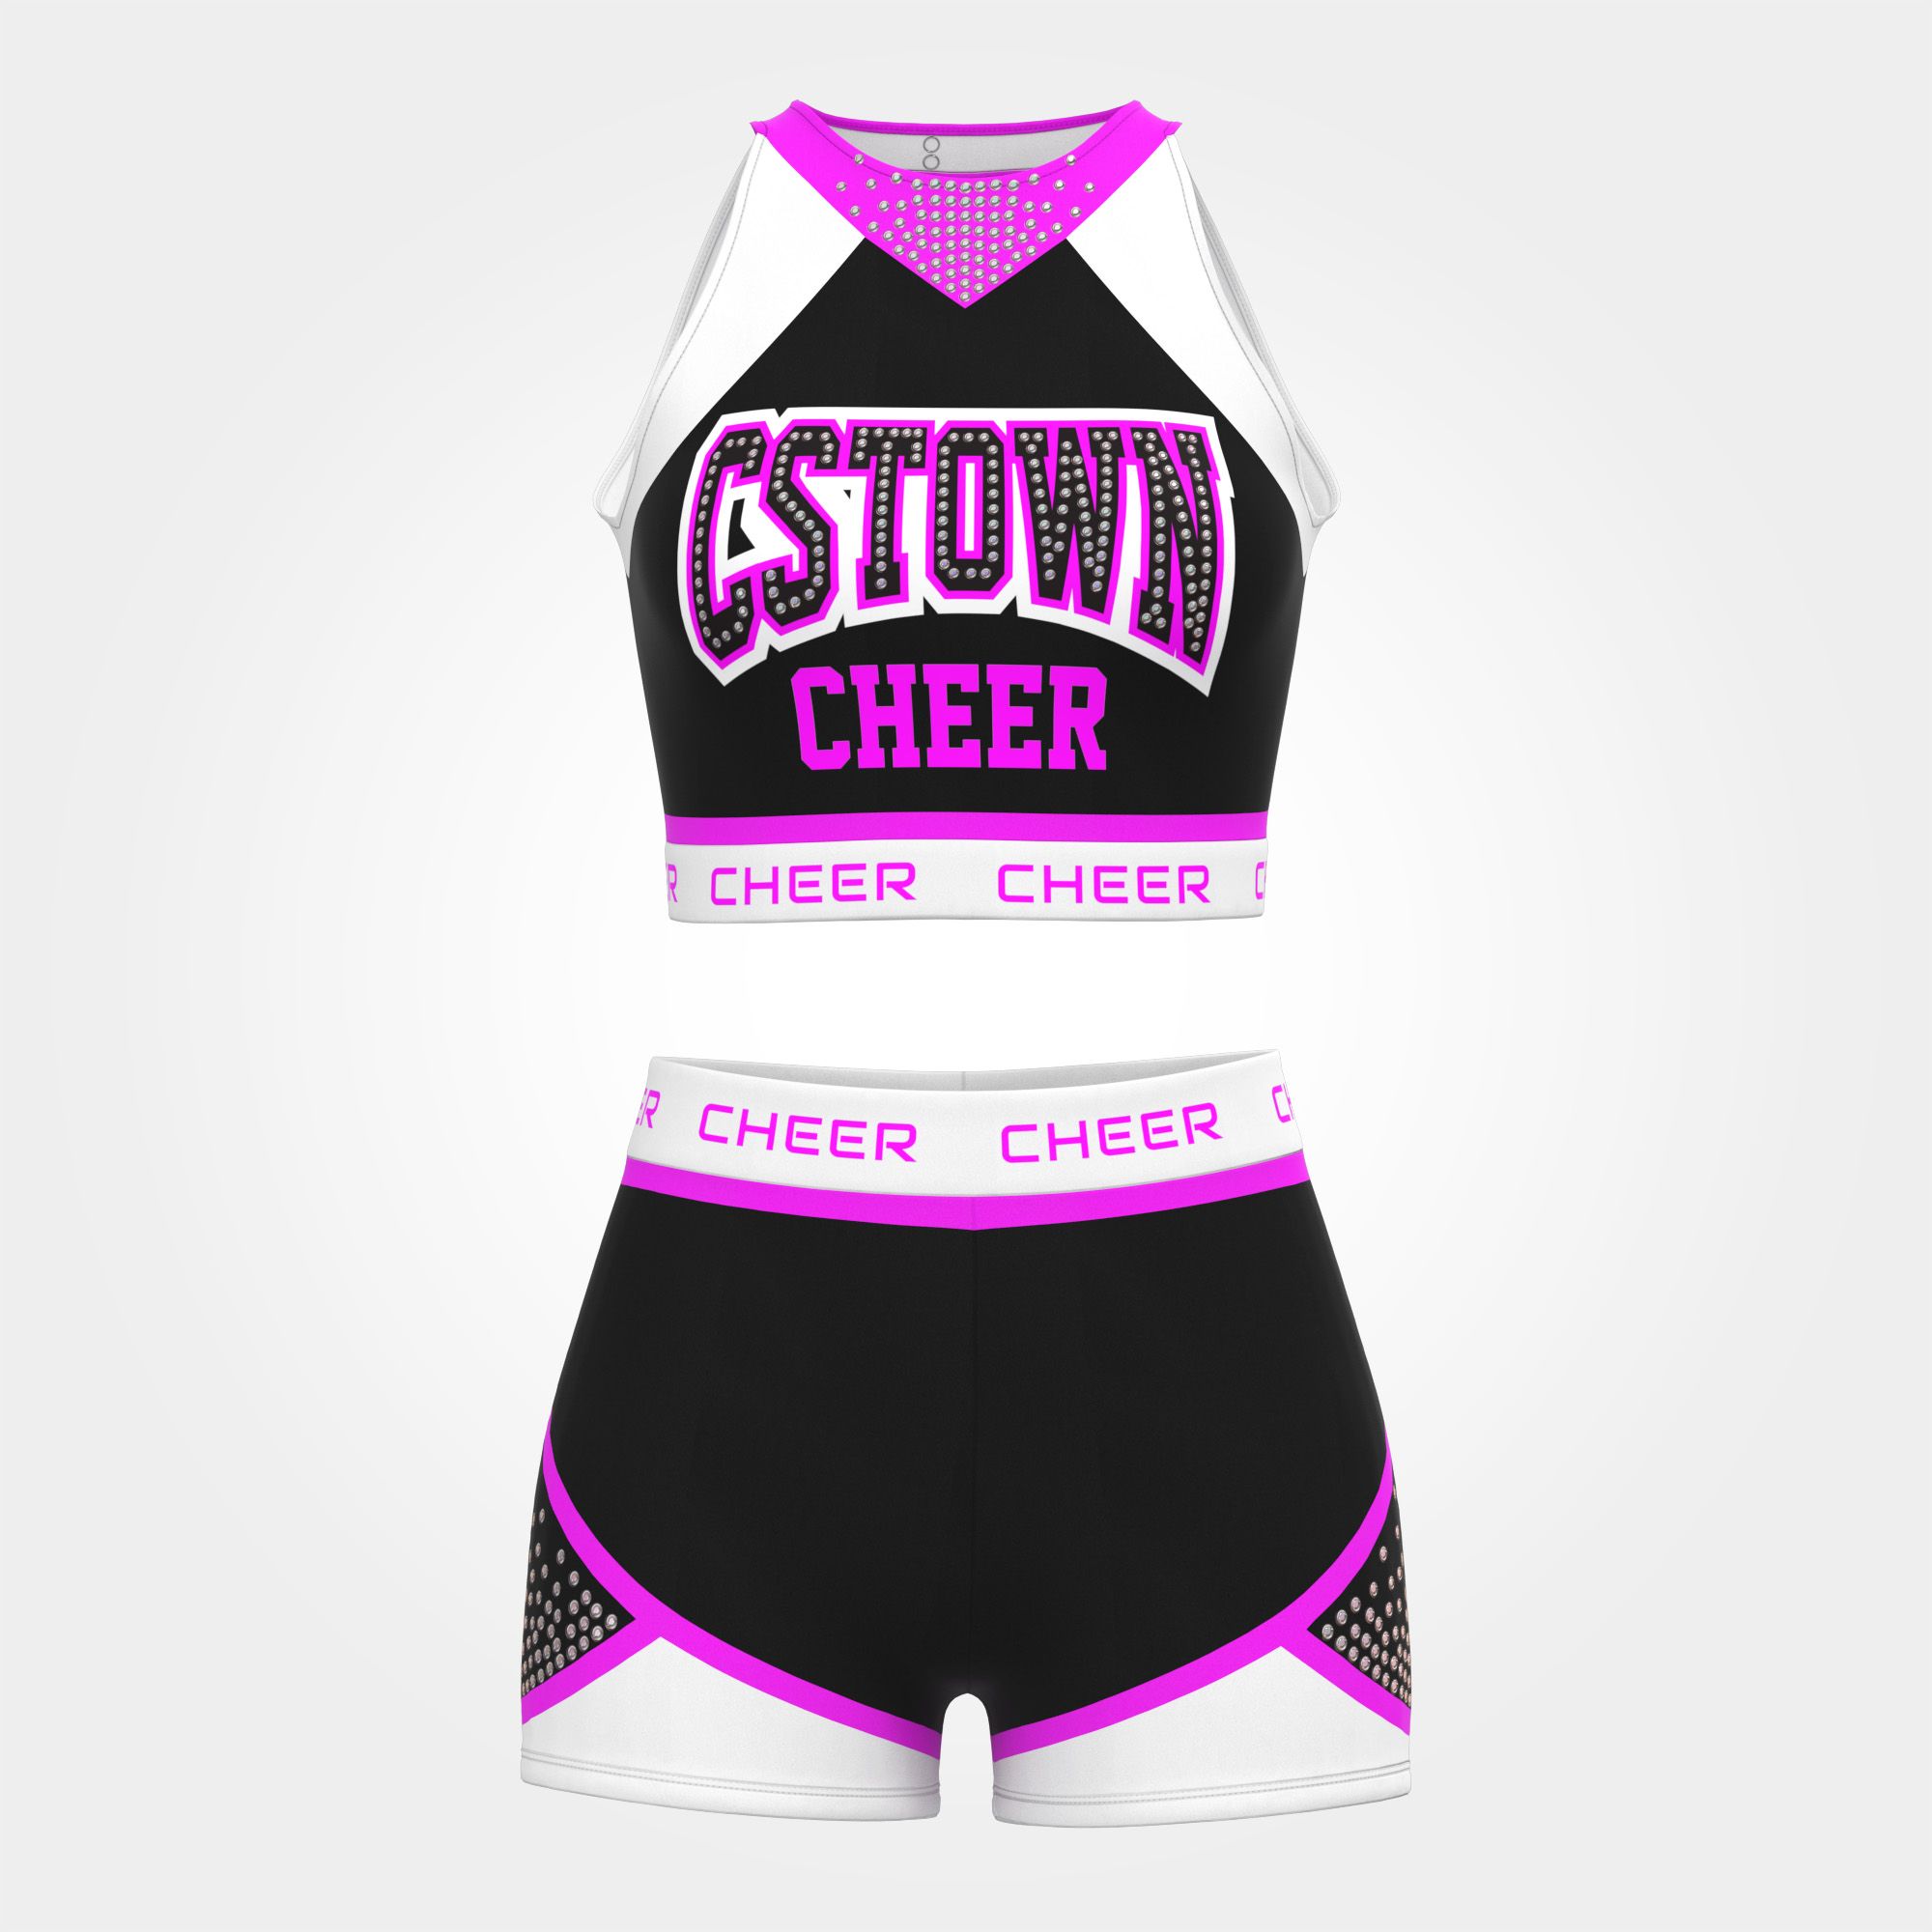 wholesale blue black and white practice cheer uniforms